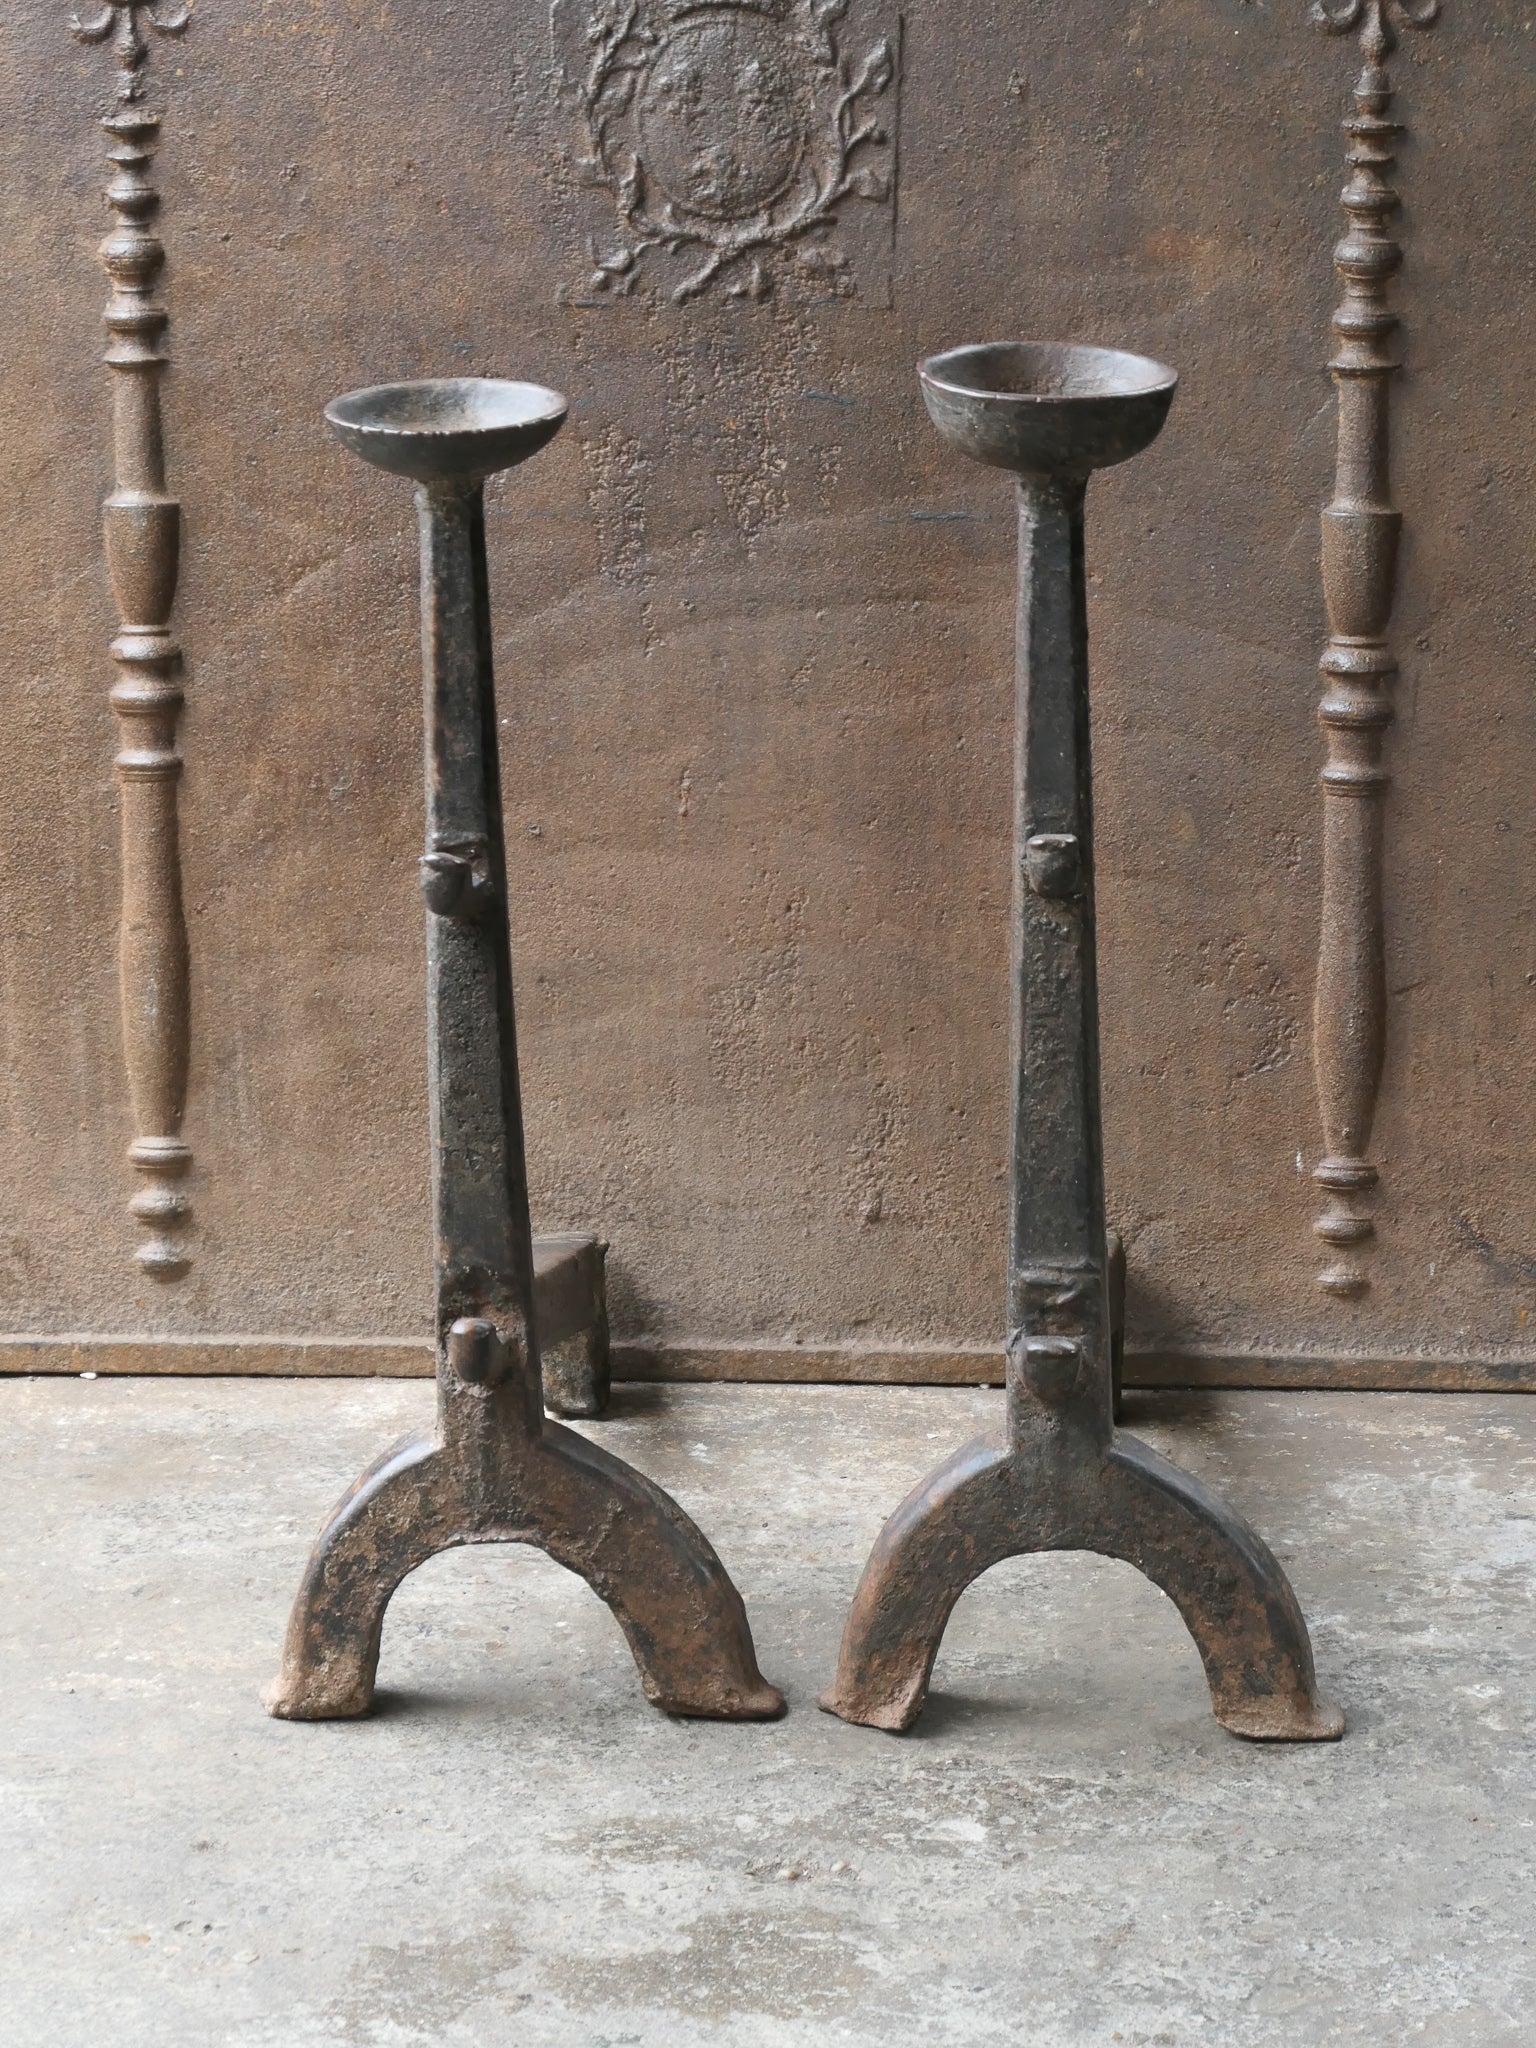 Large 17th century French andirons made of wrought iron. The style of the andirons is gothic. These French andirons are called 'landiers' in France. This dates from the times the andirons were the main cooking equipment in the house. They had spit